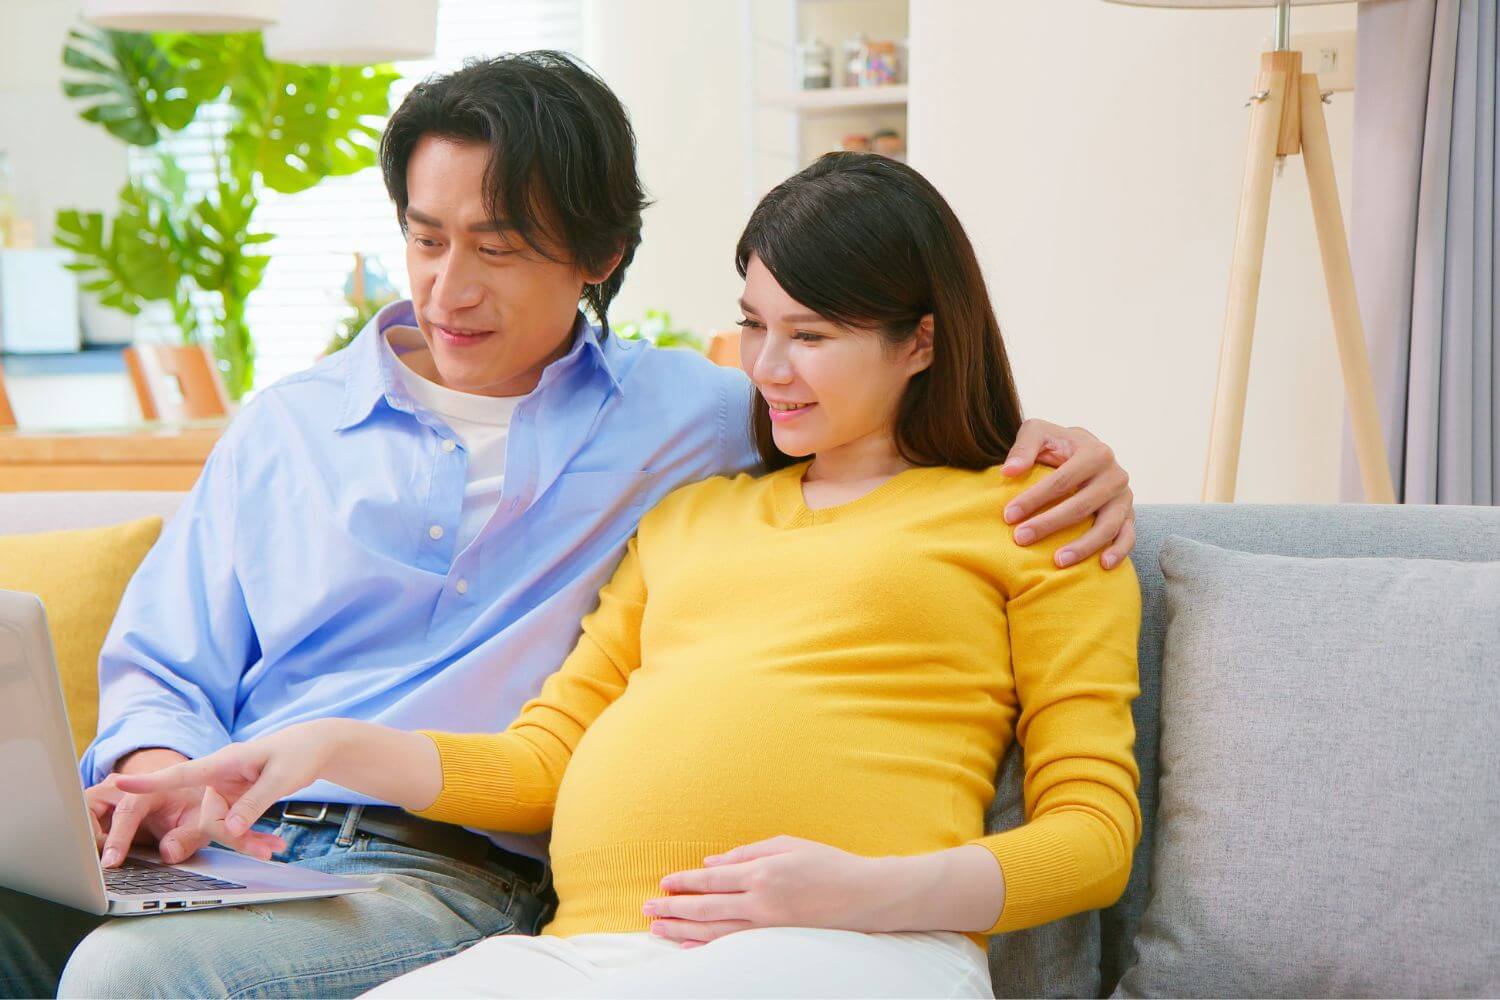 Pregnant woman and her partner looking at a laptop